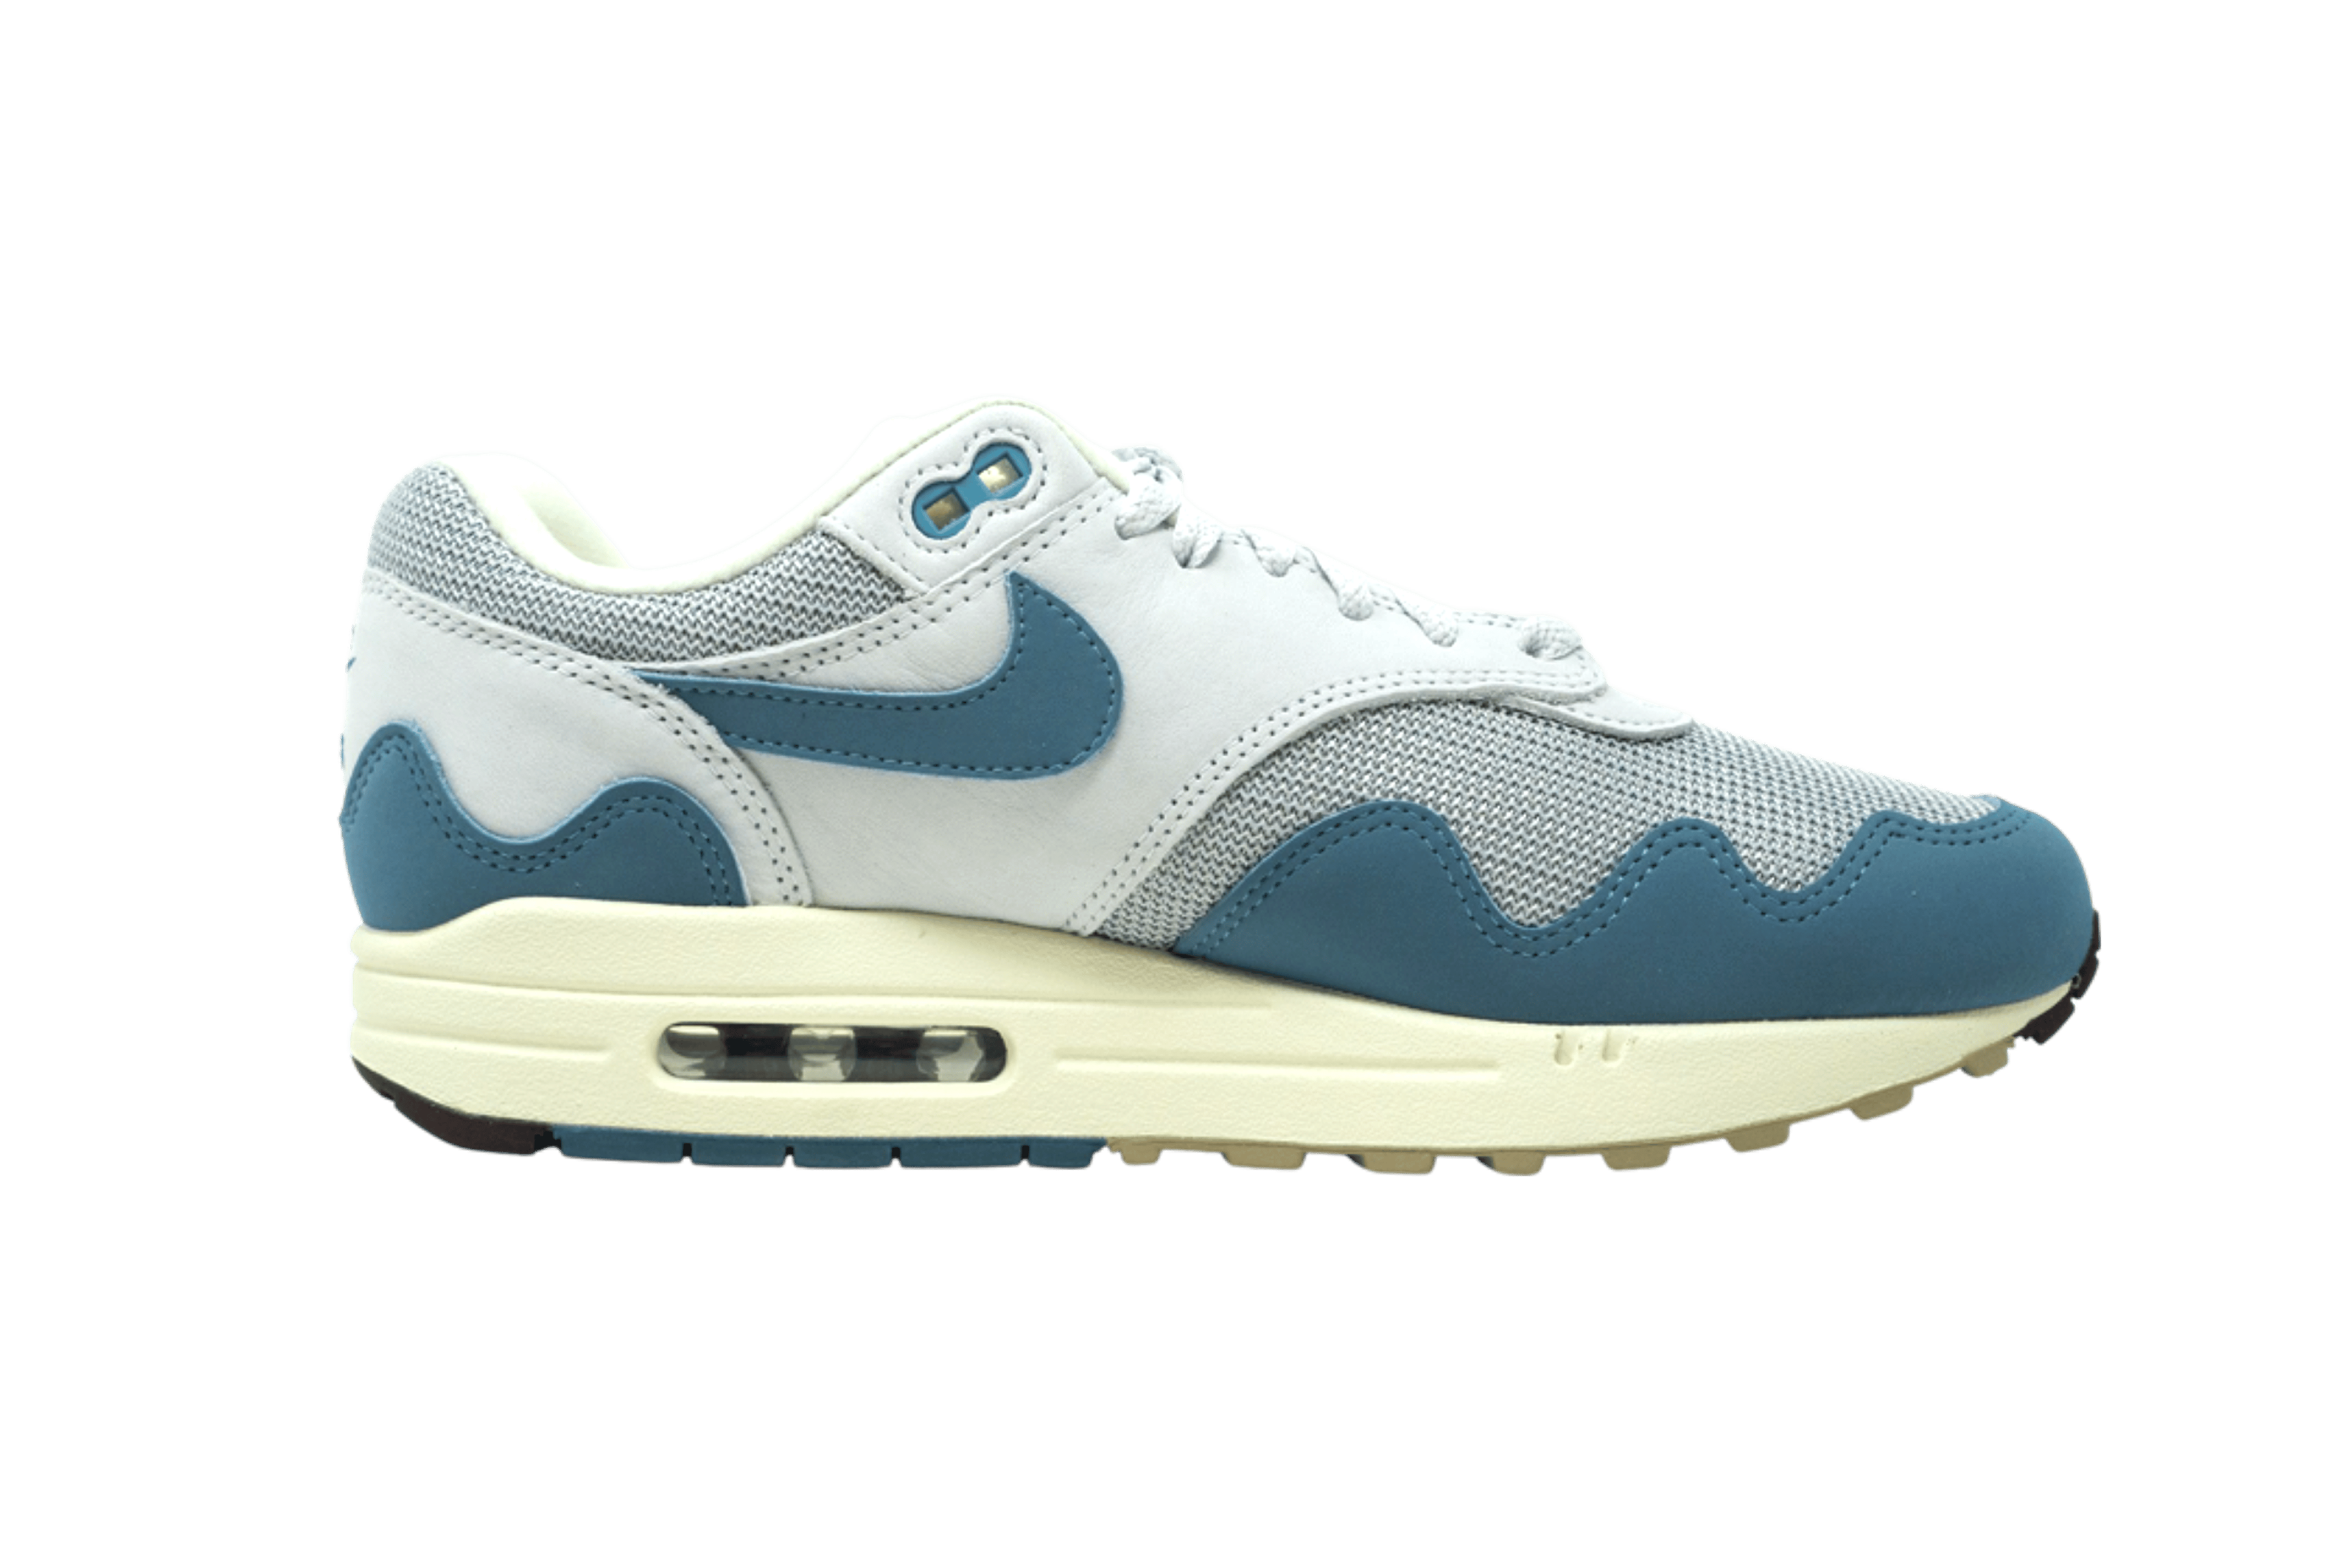 Alternate View 3 of Nike Air Max 1 Patta Waves Noise Aqua (with Bracelet)